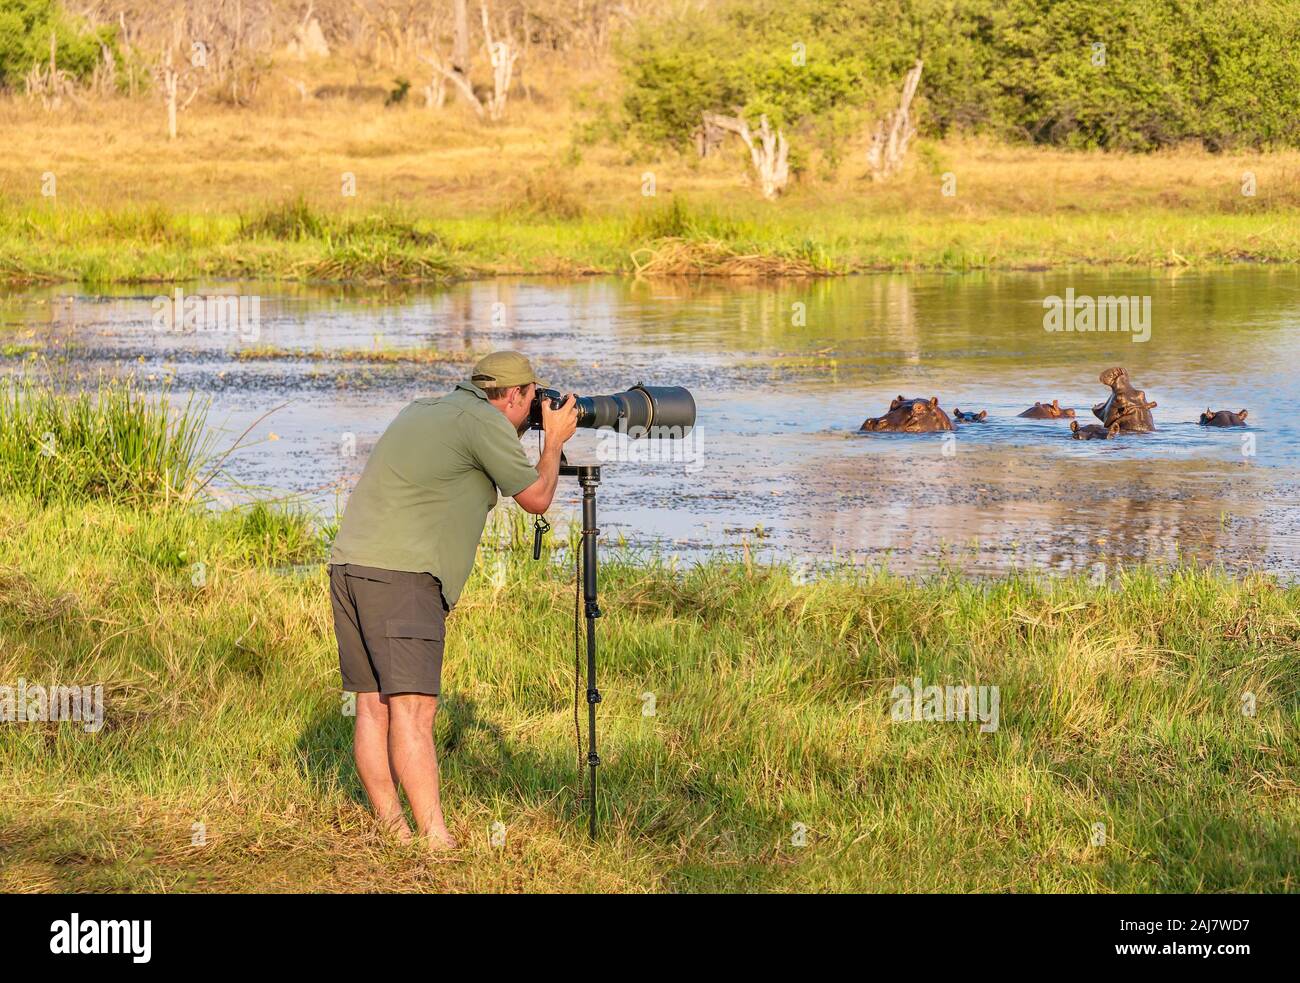 Northern Botswana - Sept 25, 2014. A male wildlife photographer takes photos near a group of hippos in a water hole. Stock Photo